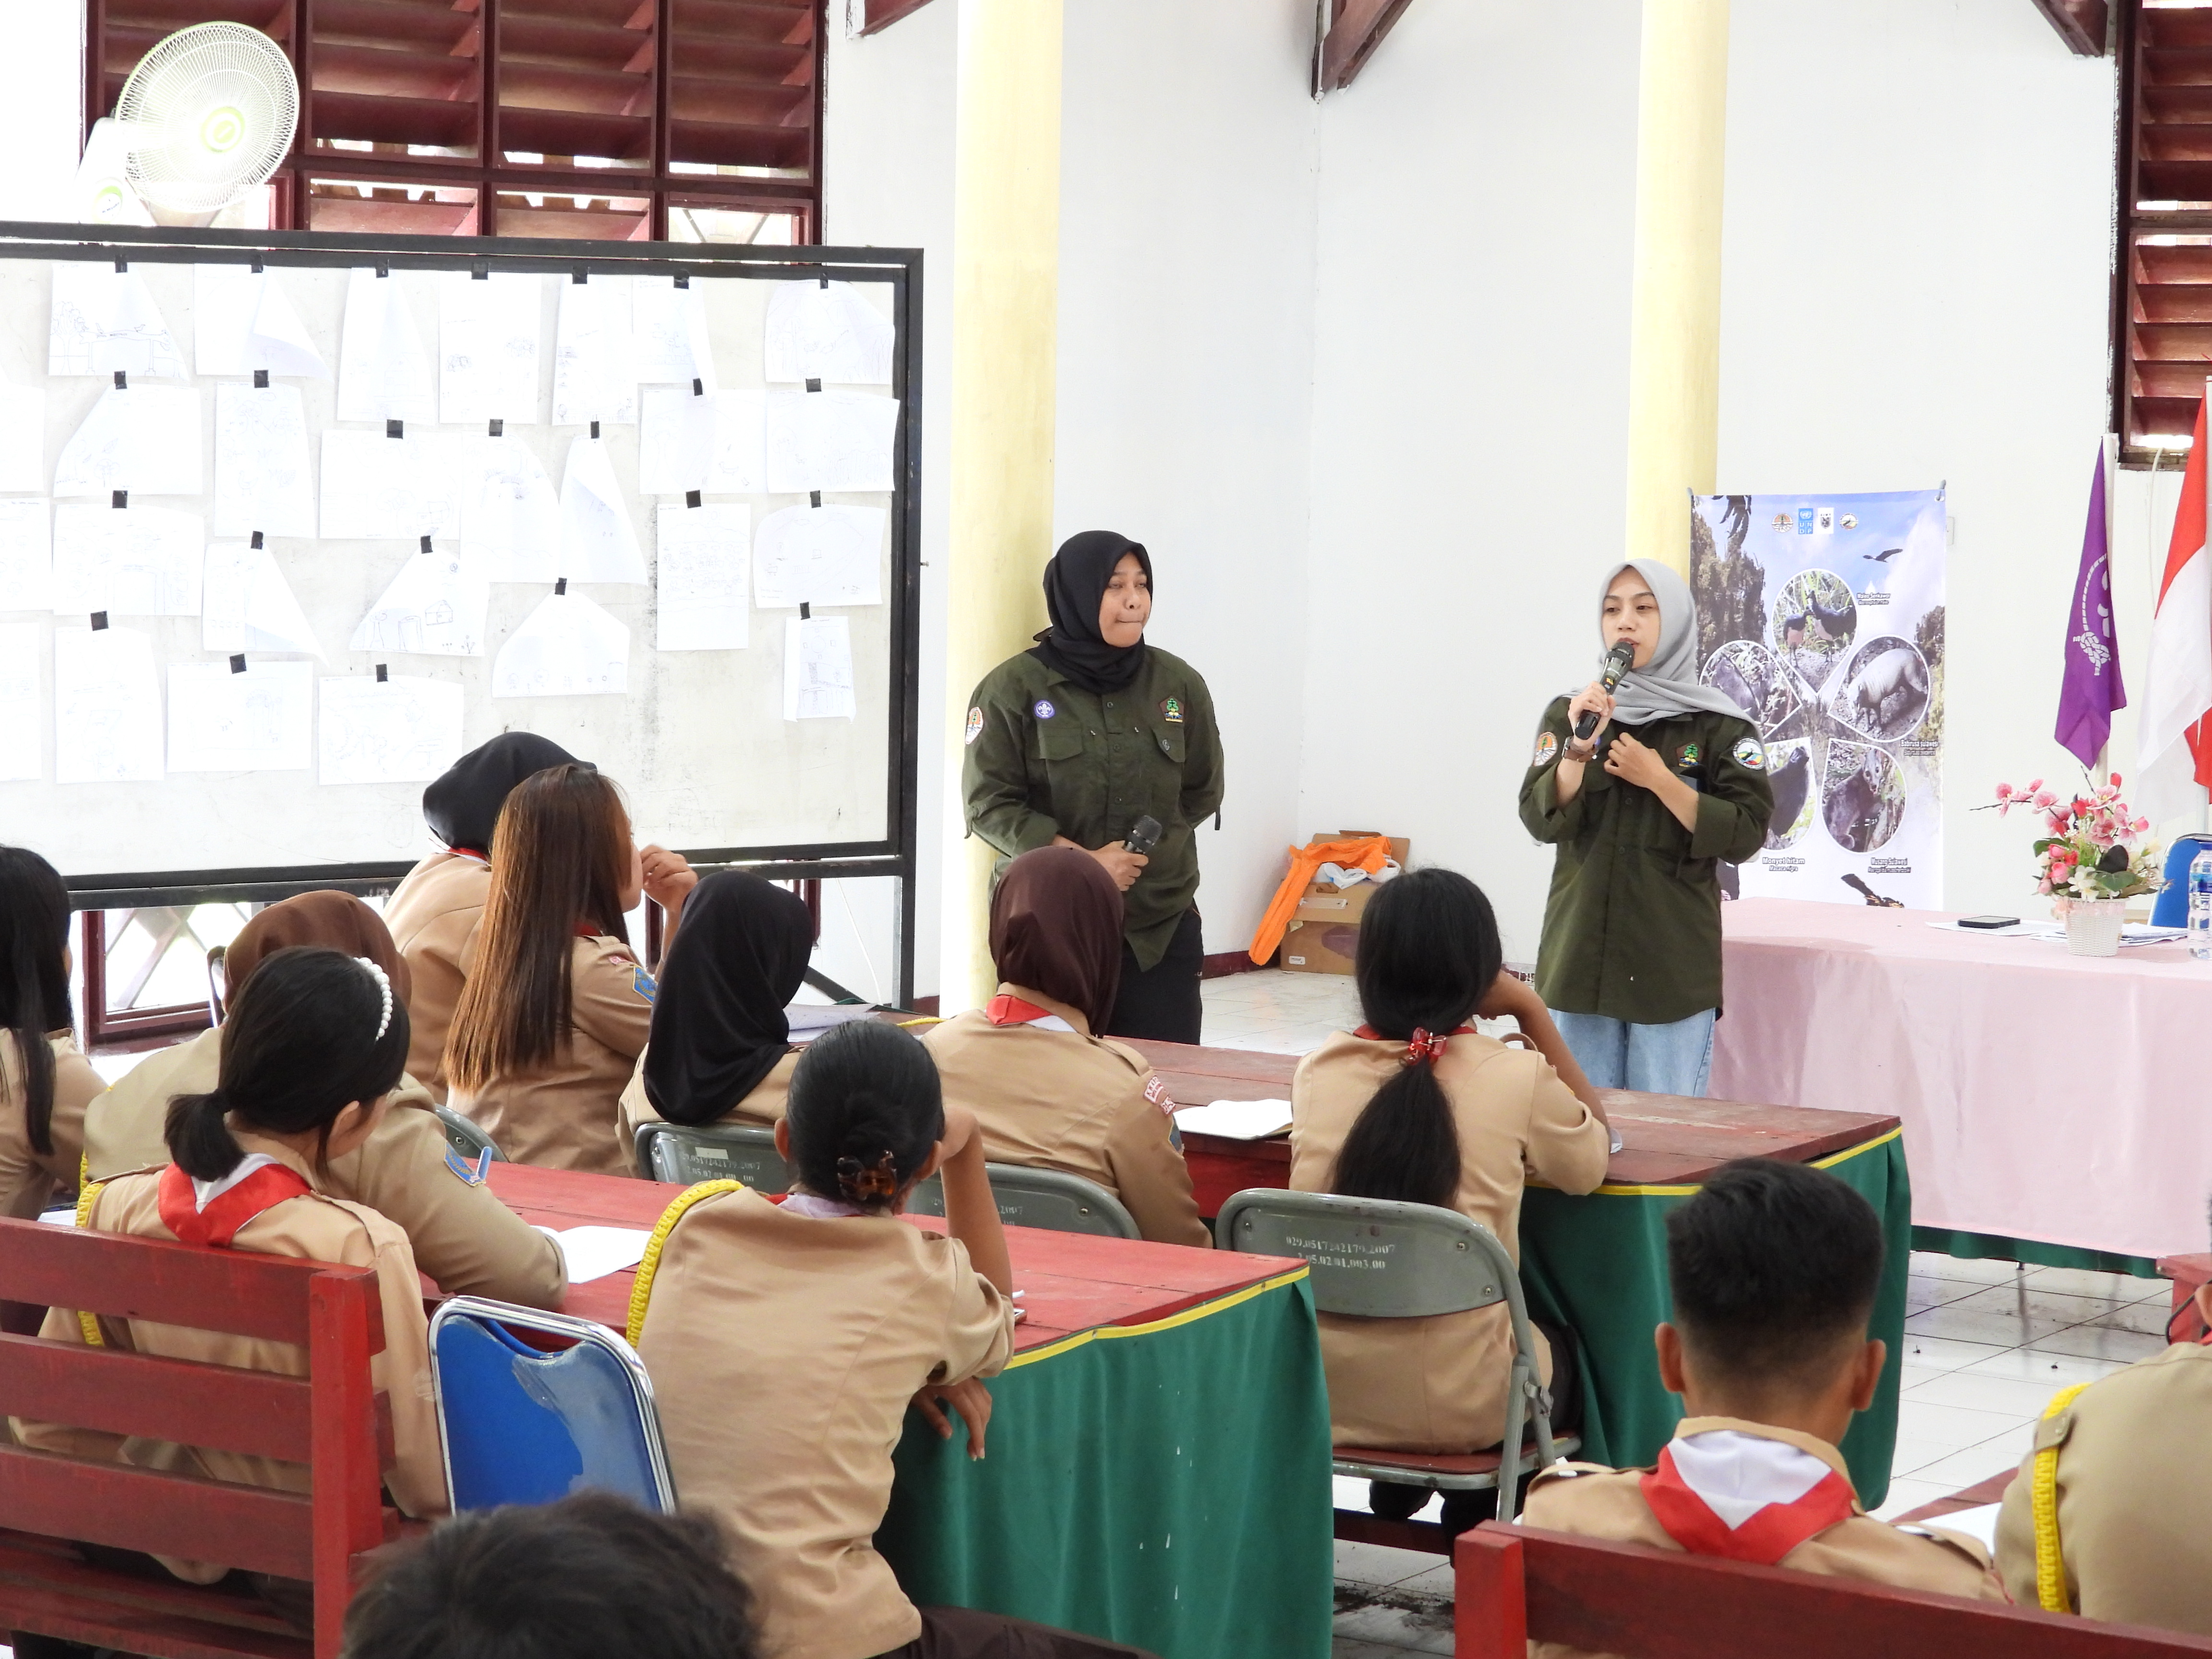 Inspiring Women Partners of Forest Rangers (IWPFR) personnel shared conservation messages to the scouts. 